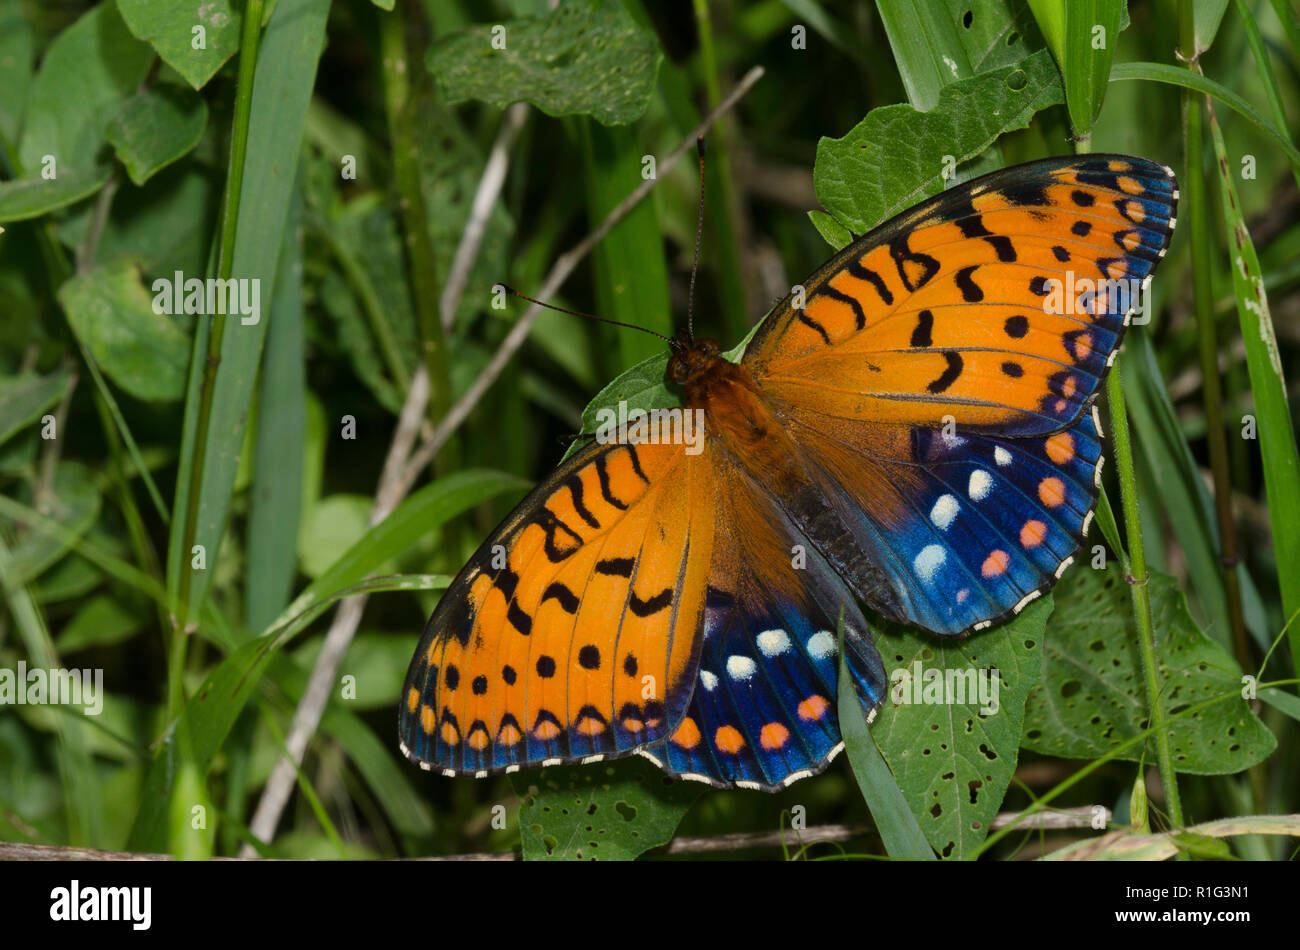 Regal Fritillary Butterfly High Resolution Stock Photography and Images -  Alamy